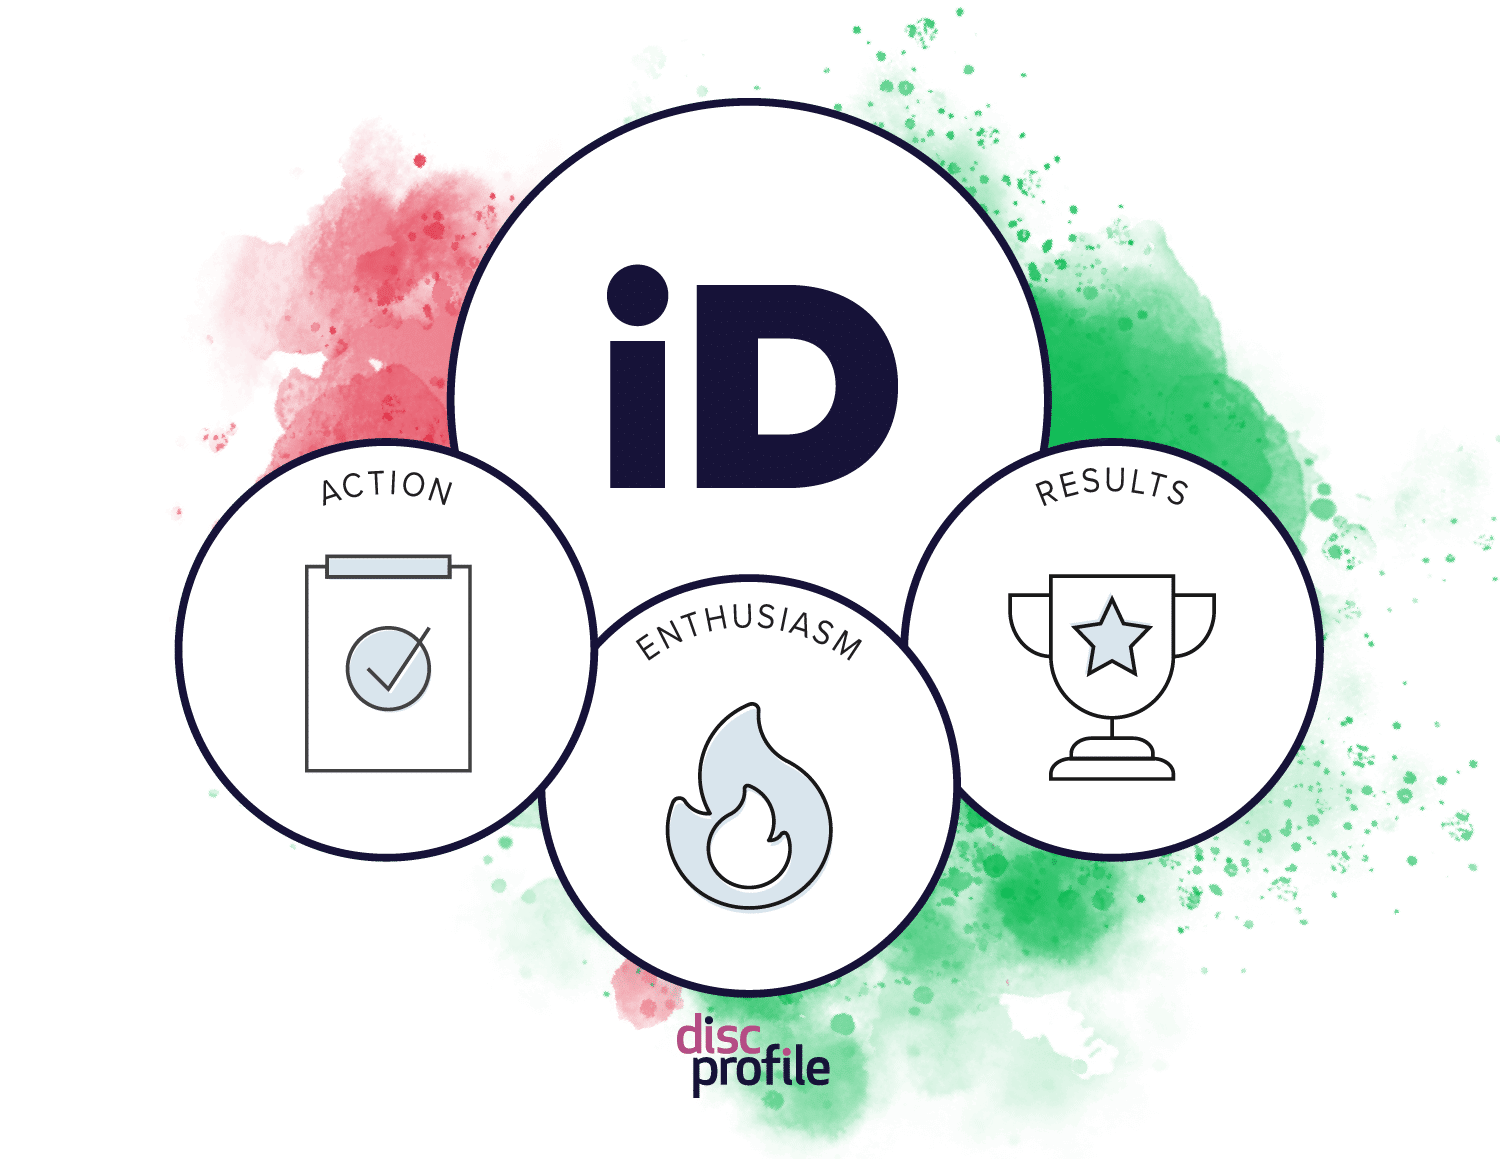 iD style graphic showing the priorities of action, enthusiasm, and results